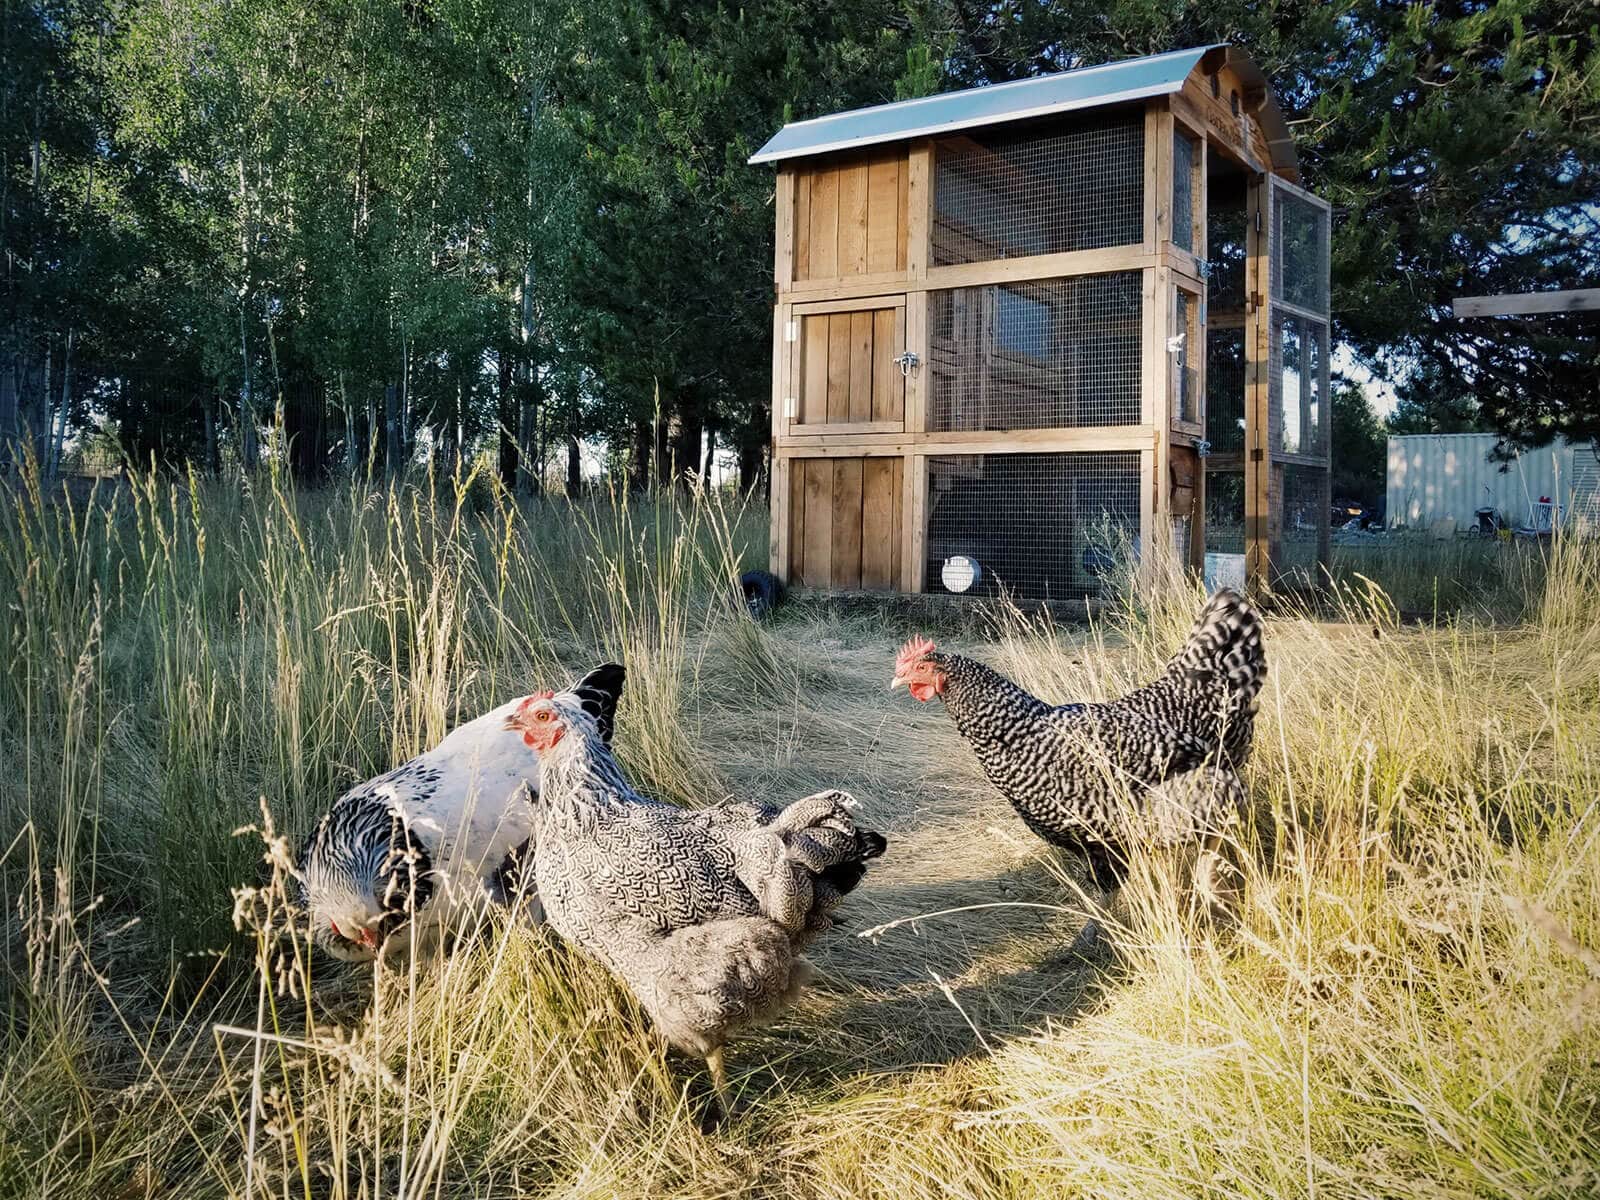 Flock of three chickens free-ranging in the tall grass in front of the coop